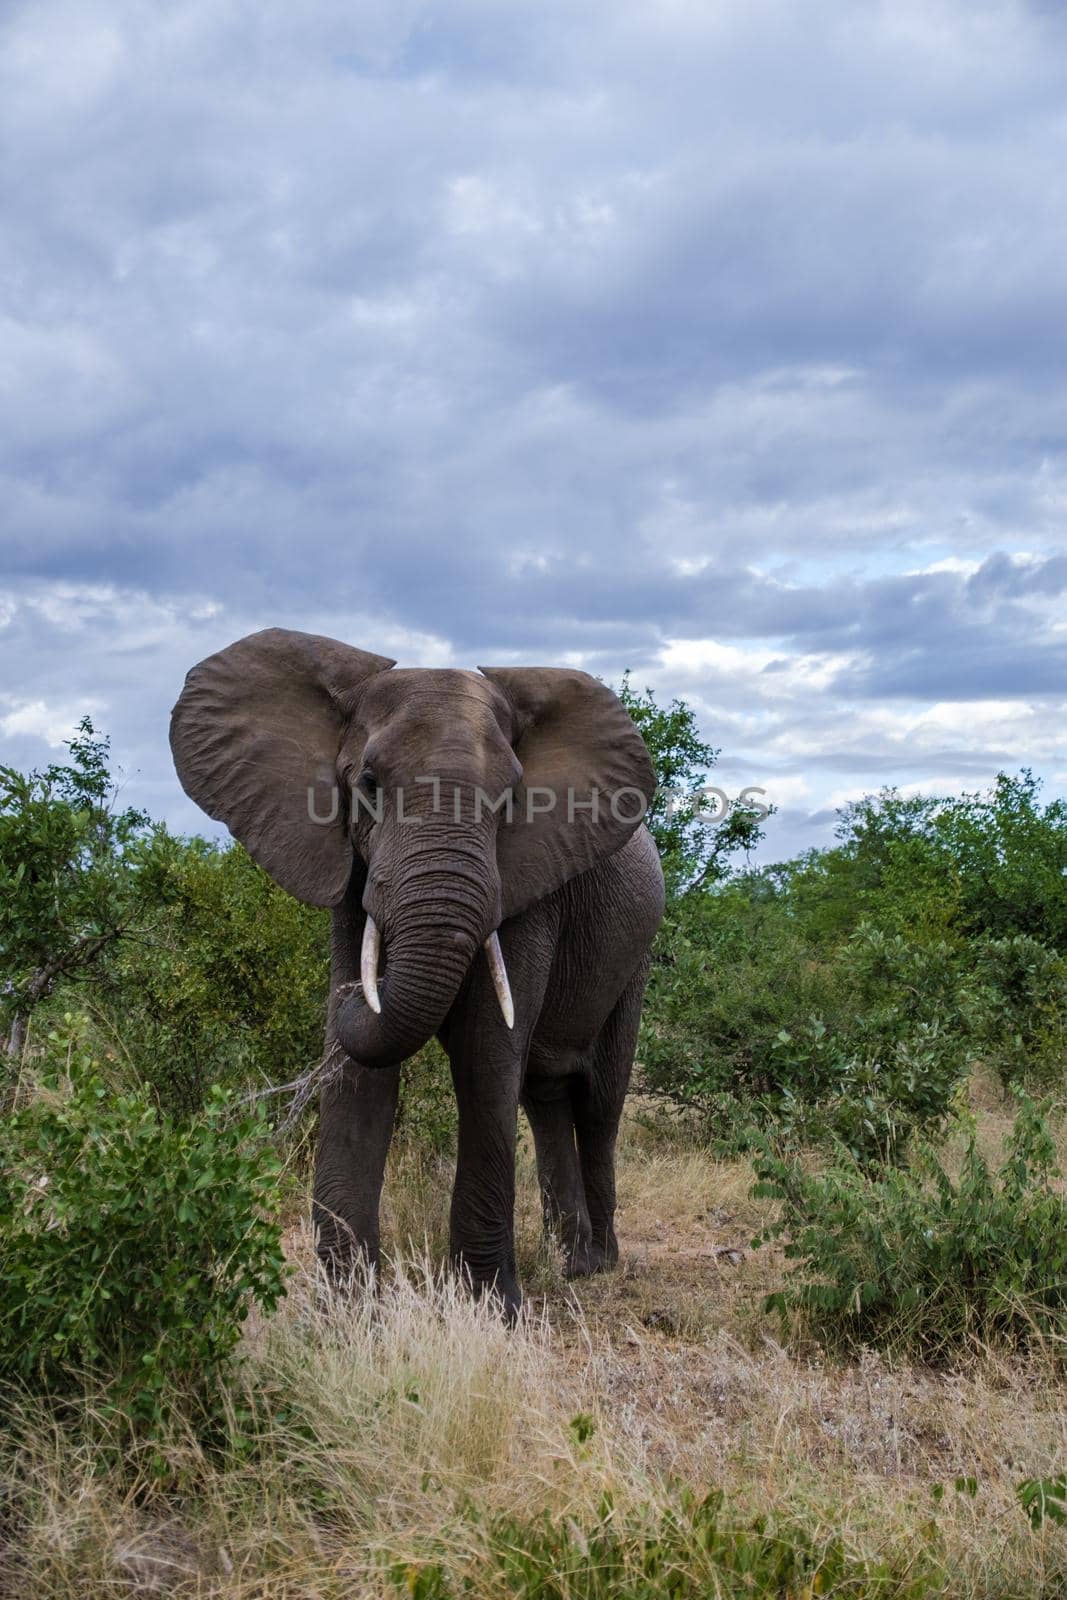 African Elephant in The Klaserie Private Nature Reserve part of the Kruger national park in South Africa, African Elephants in the wild bus by fokkebok